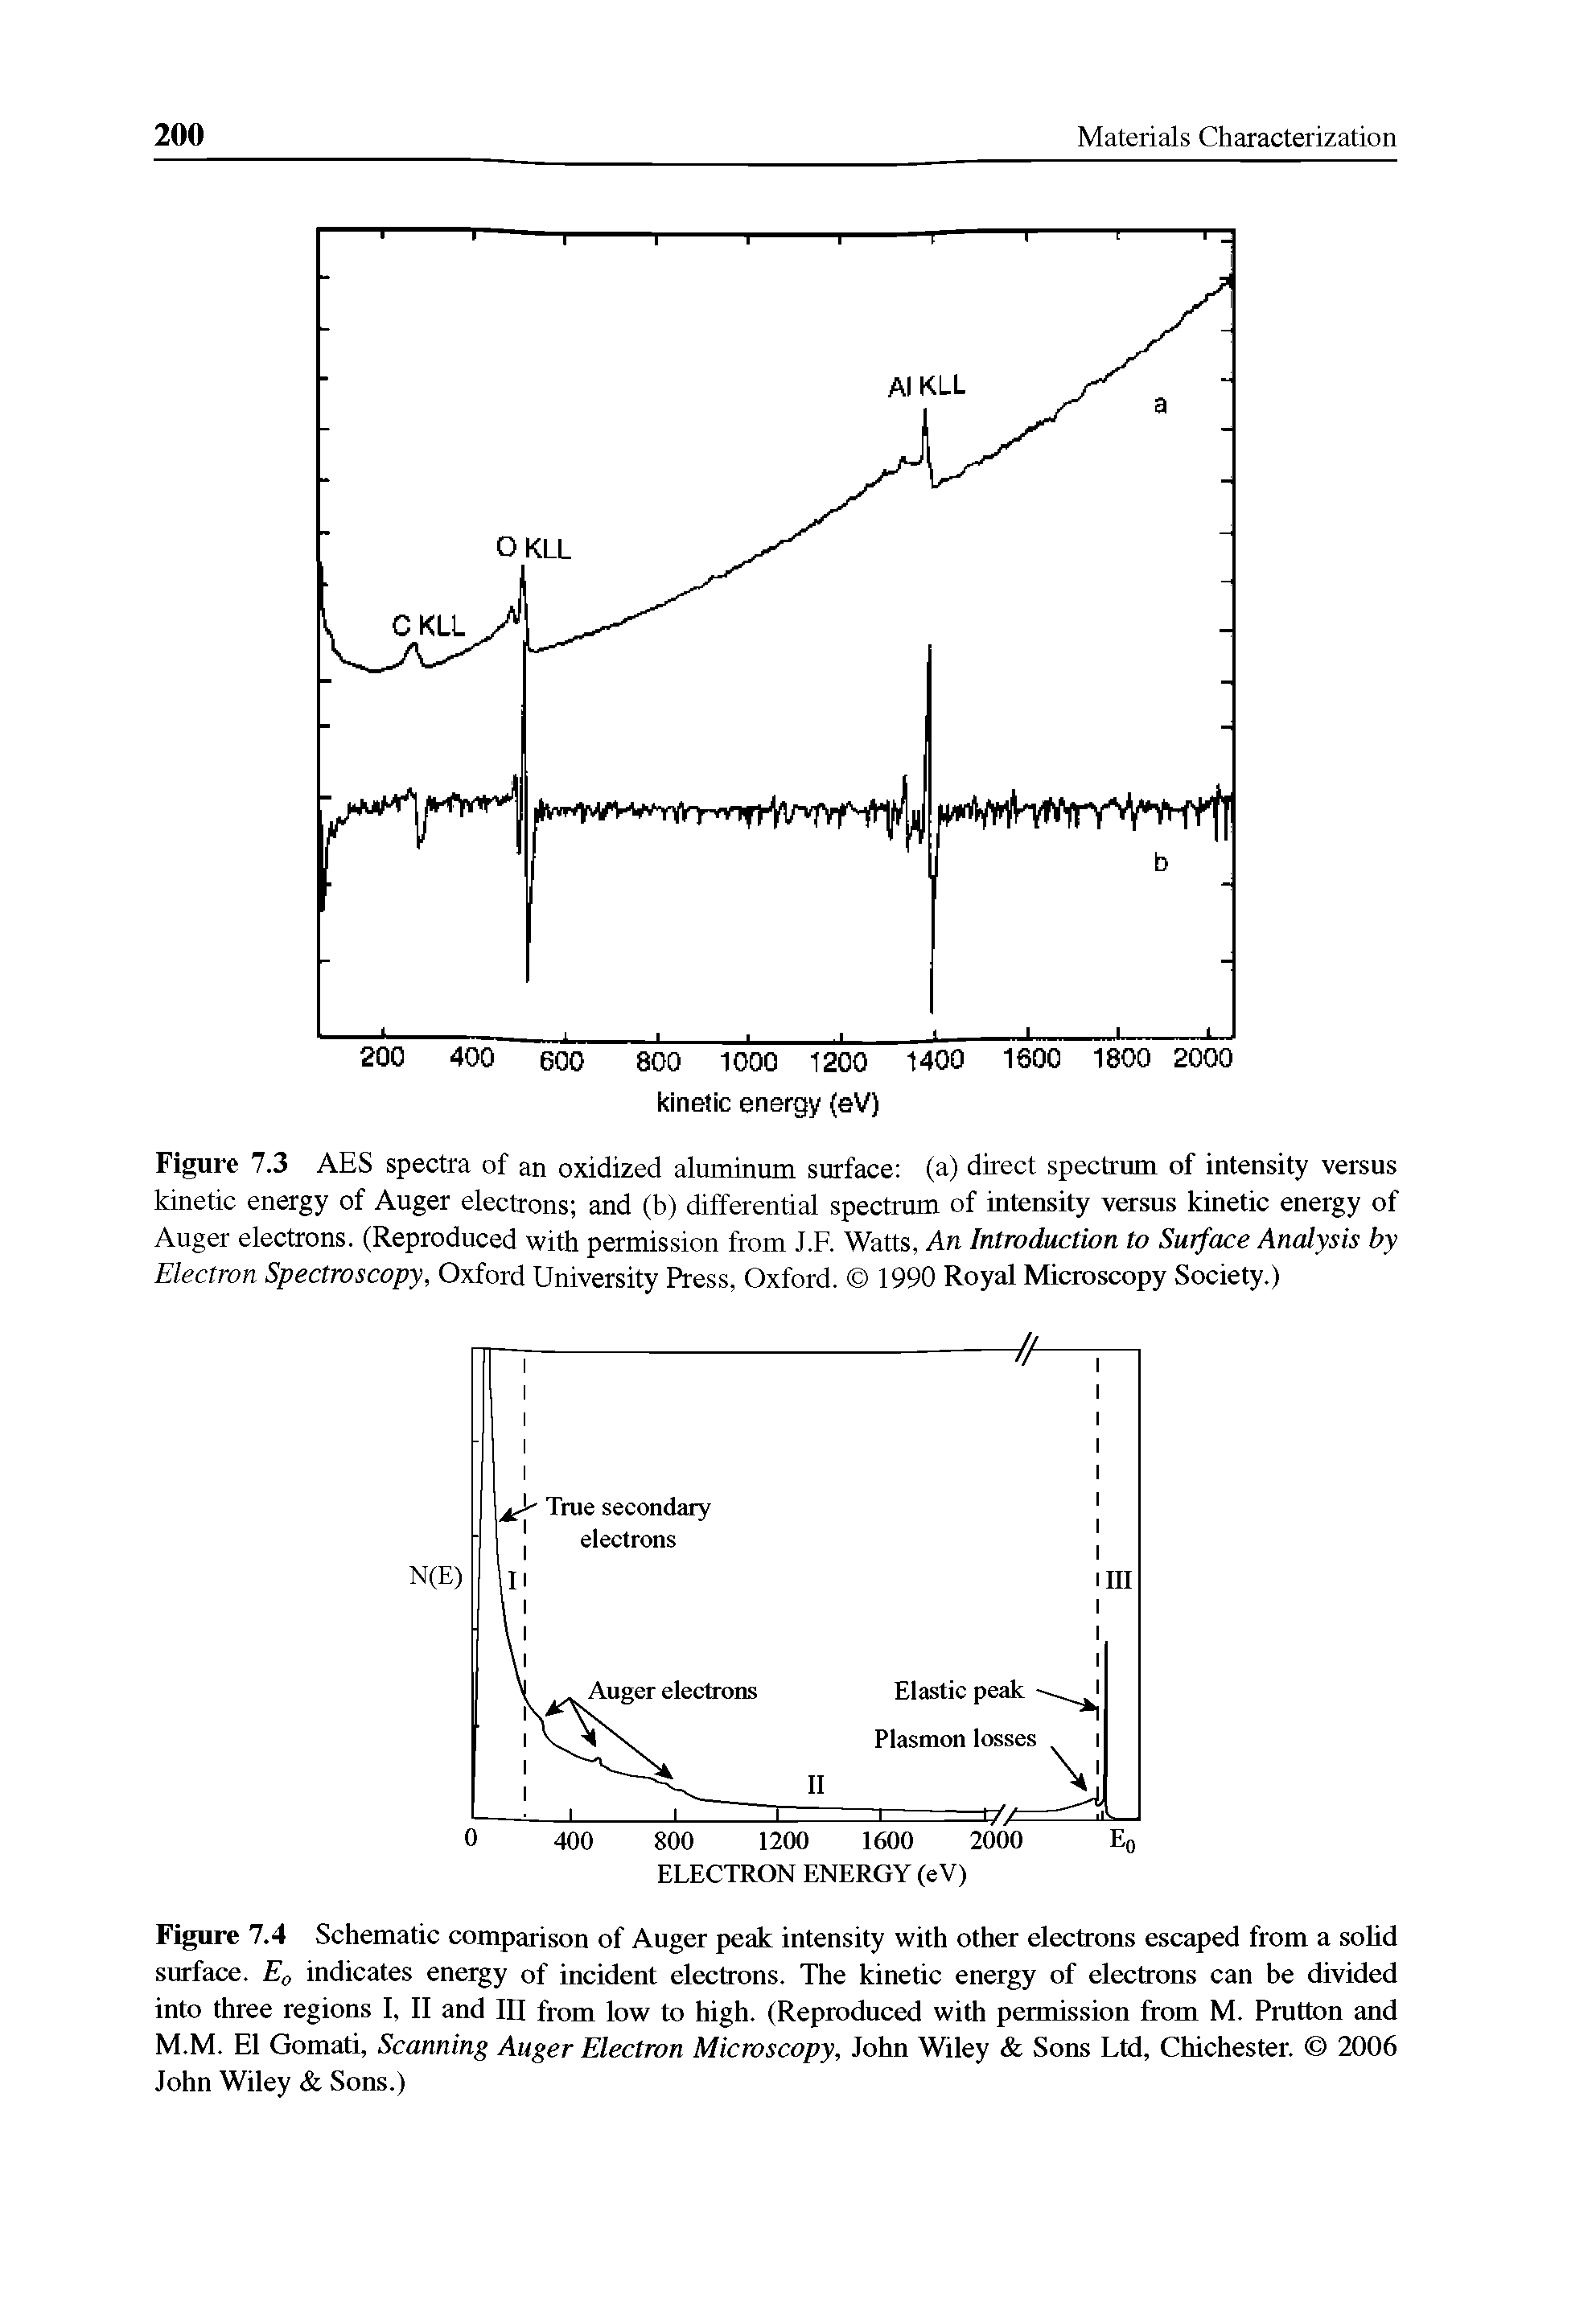 Figure 7.4 Schematic comparison of Auger peak intensity with other electrons escaped from a solid surface. E0 indicates energy of incident electrons. The kinetic energy of electrons can be divided into three regions I, II and III from low to high. (Reproduced with permission from M. Prutton and M.M. El Gomati, Scanning Auger Electron Microscopy, John Wiley Sons Ltd, Chichester. 2006 John Wiley Sons.)...